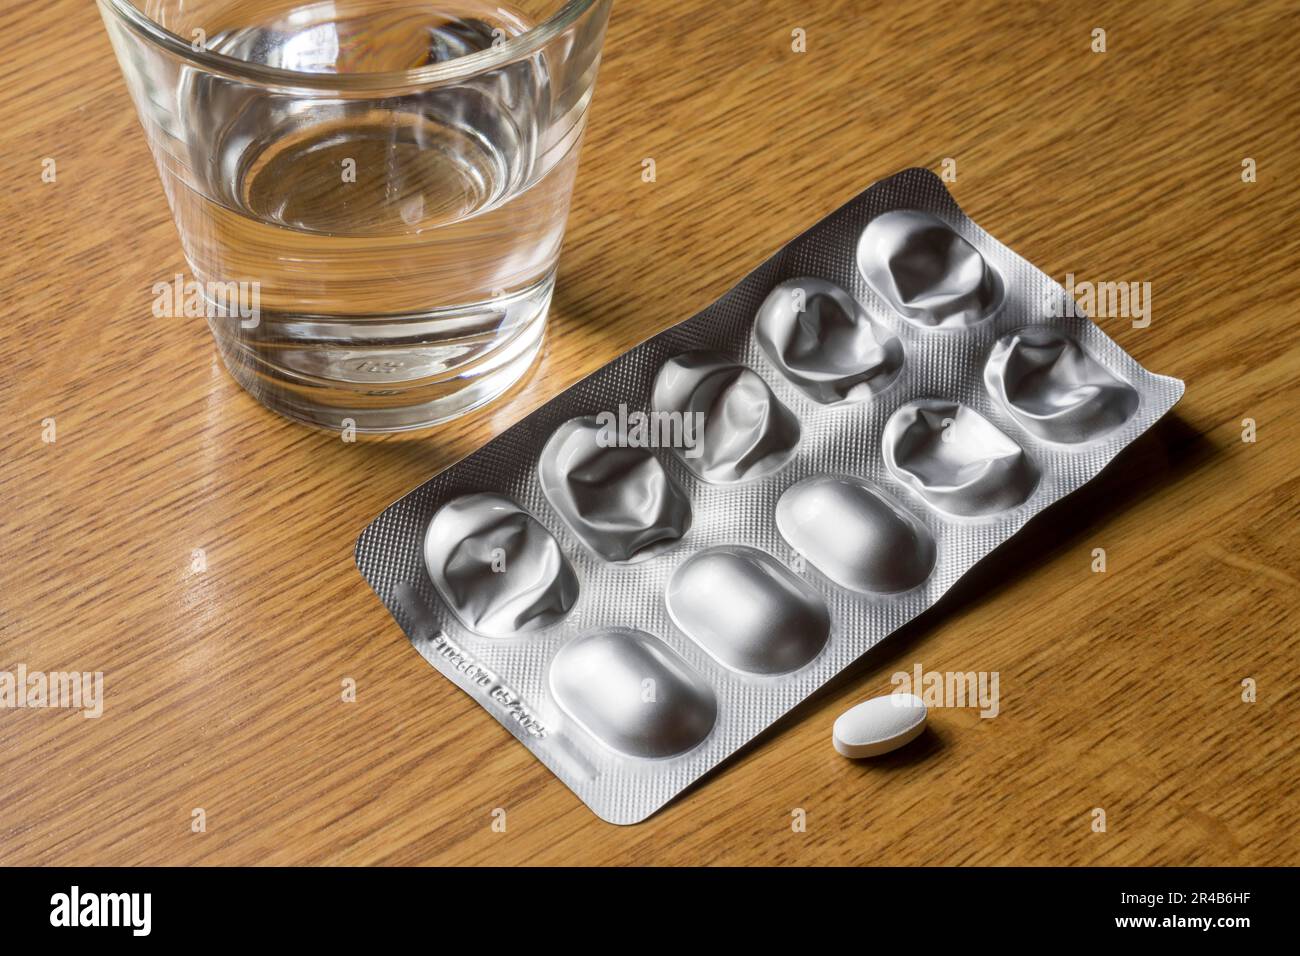 Medicines with a glass of water, tablets, blister pack Stock Photo